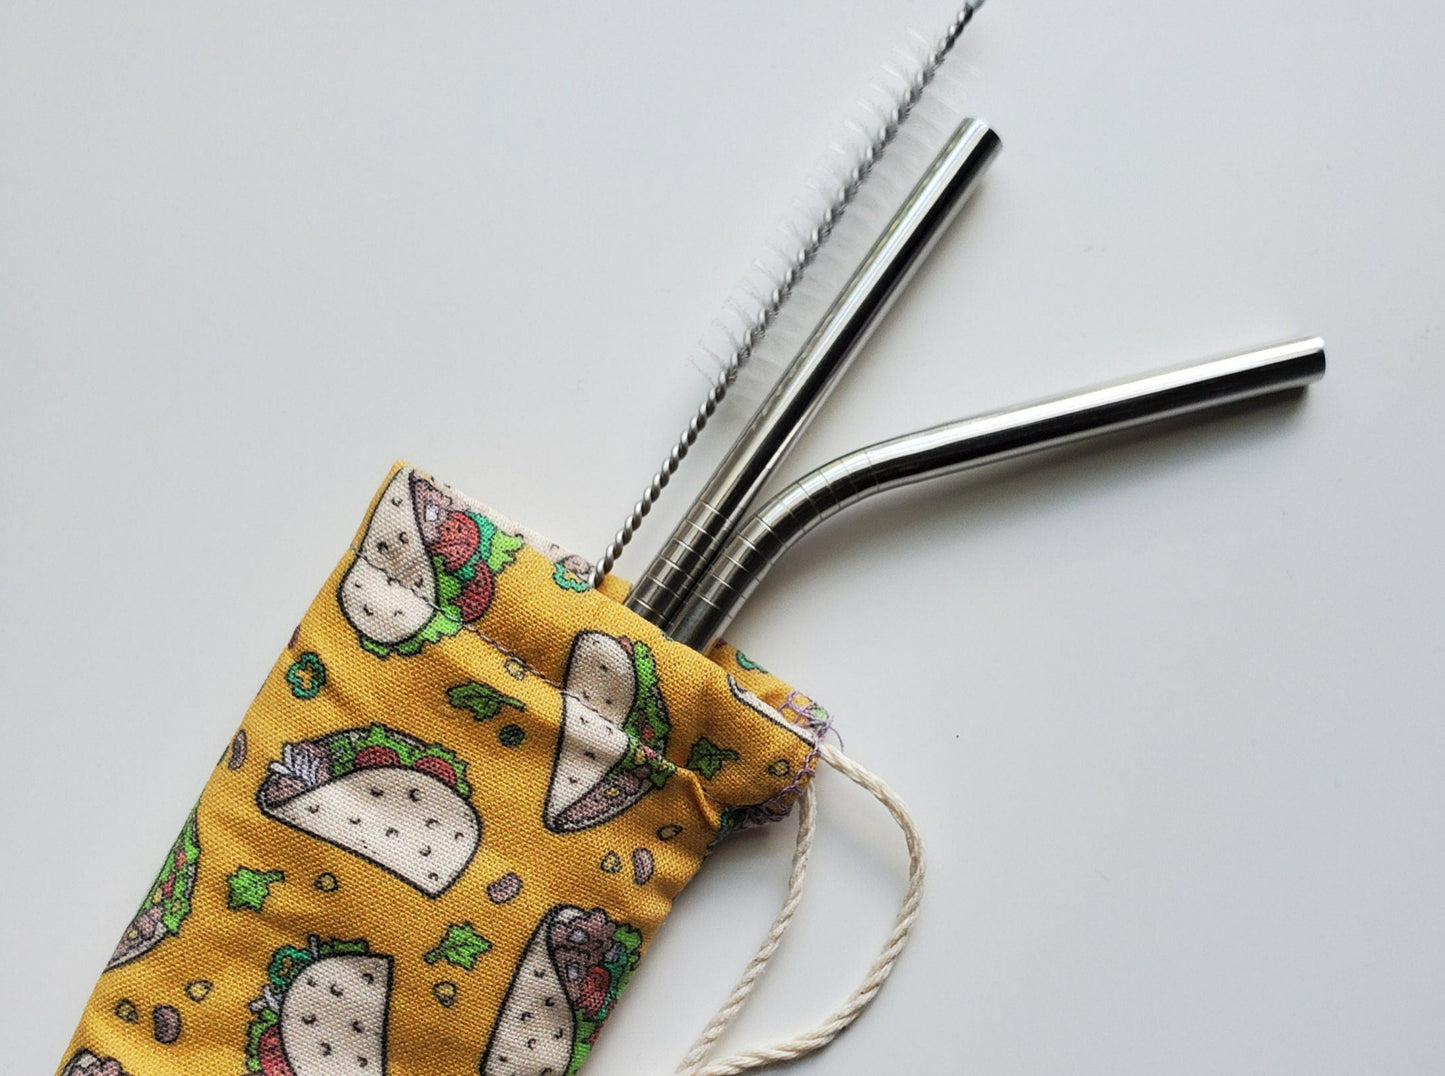 Reusable straw pouch with stainless steel straws sticking out the top. The fabric of the pouch is mustard yellow with small cartoon tacos and scattered toppings, and it has a drawstring closure.